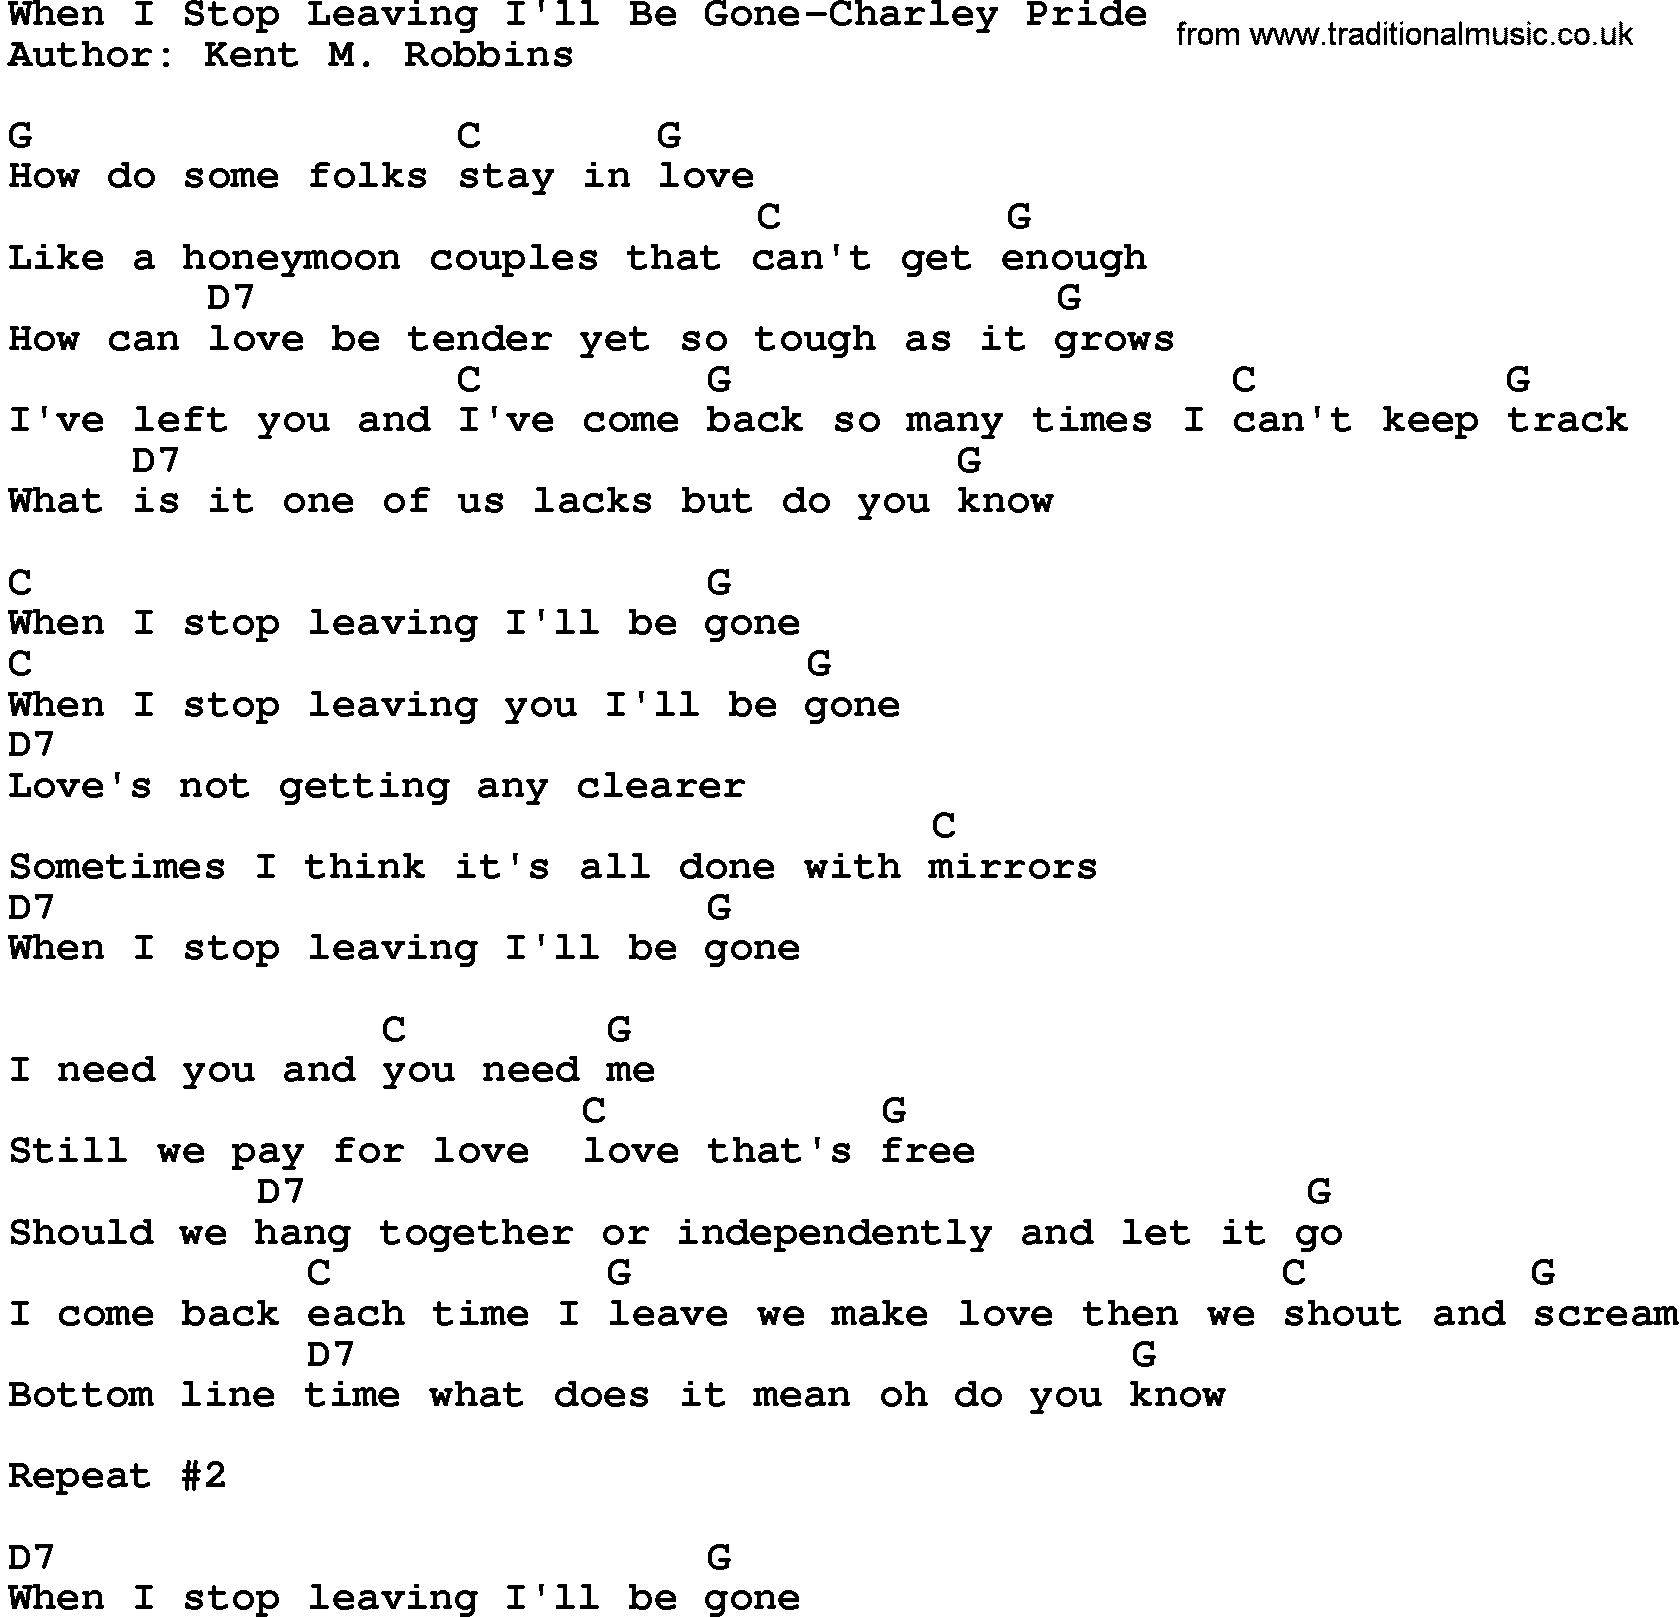 Country music song: When I Stop Leaving I'll Be Gone-Charley Pride lyrics and chords